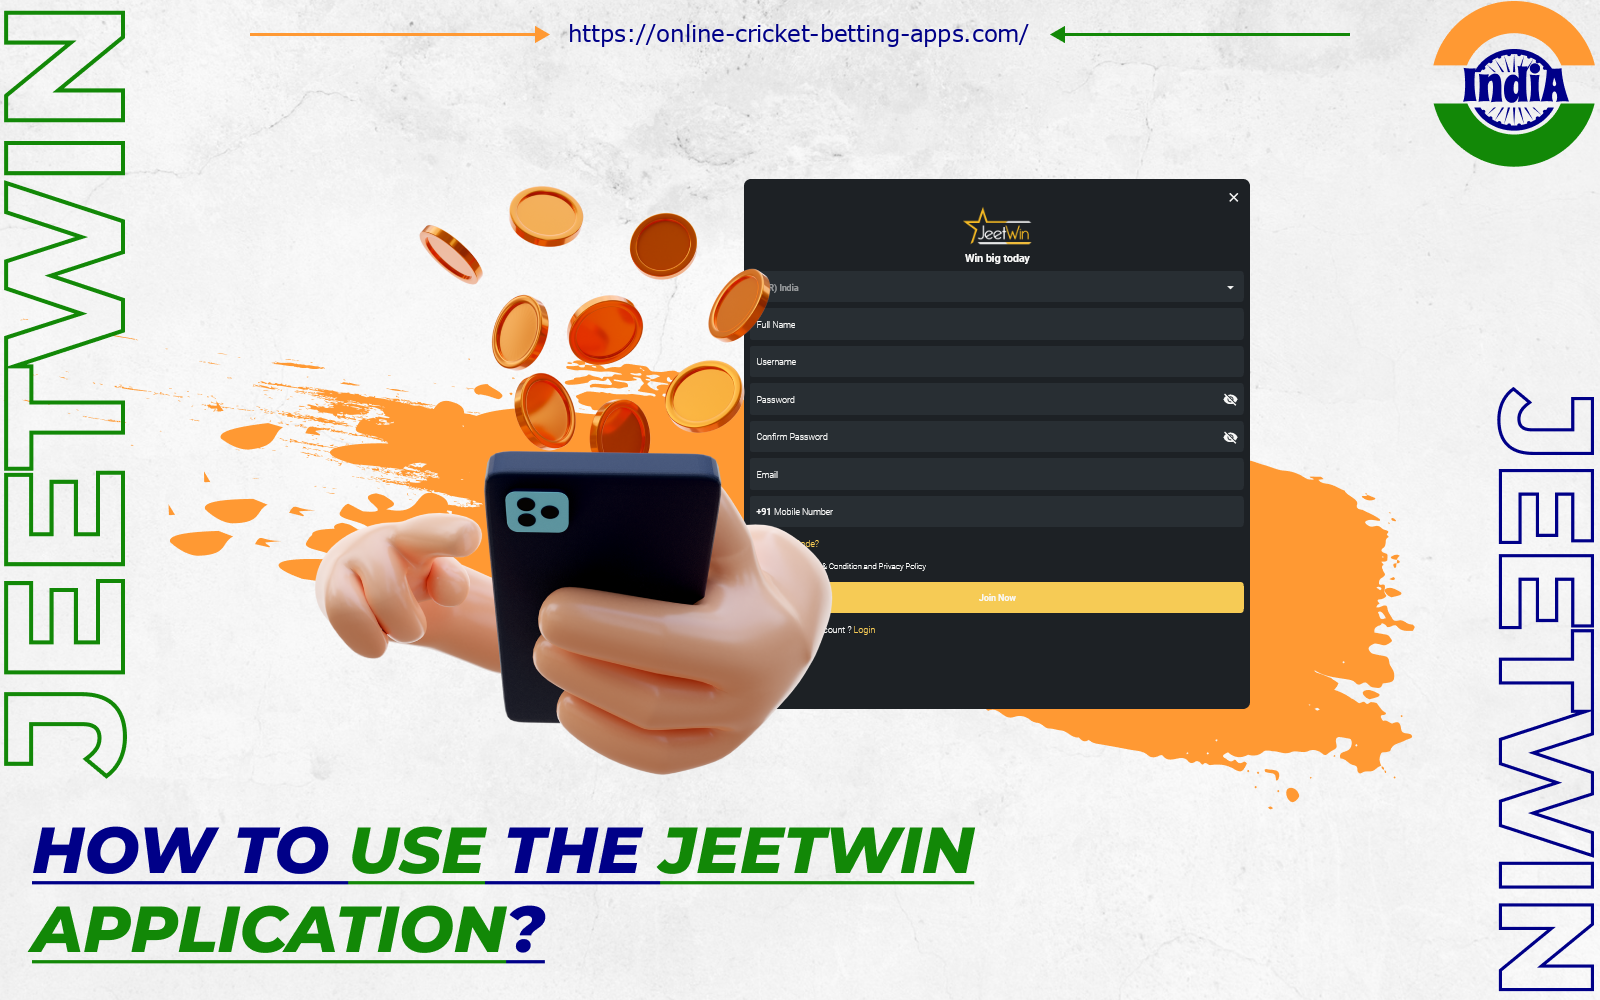 Any Indian user above 18 years of age can start gambling on the Jeetwin app after registering and making a deposit